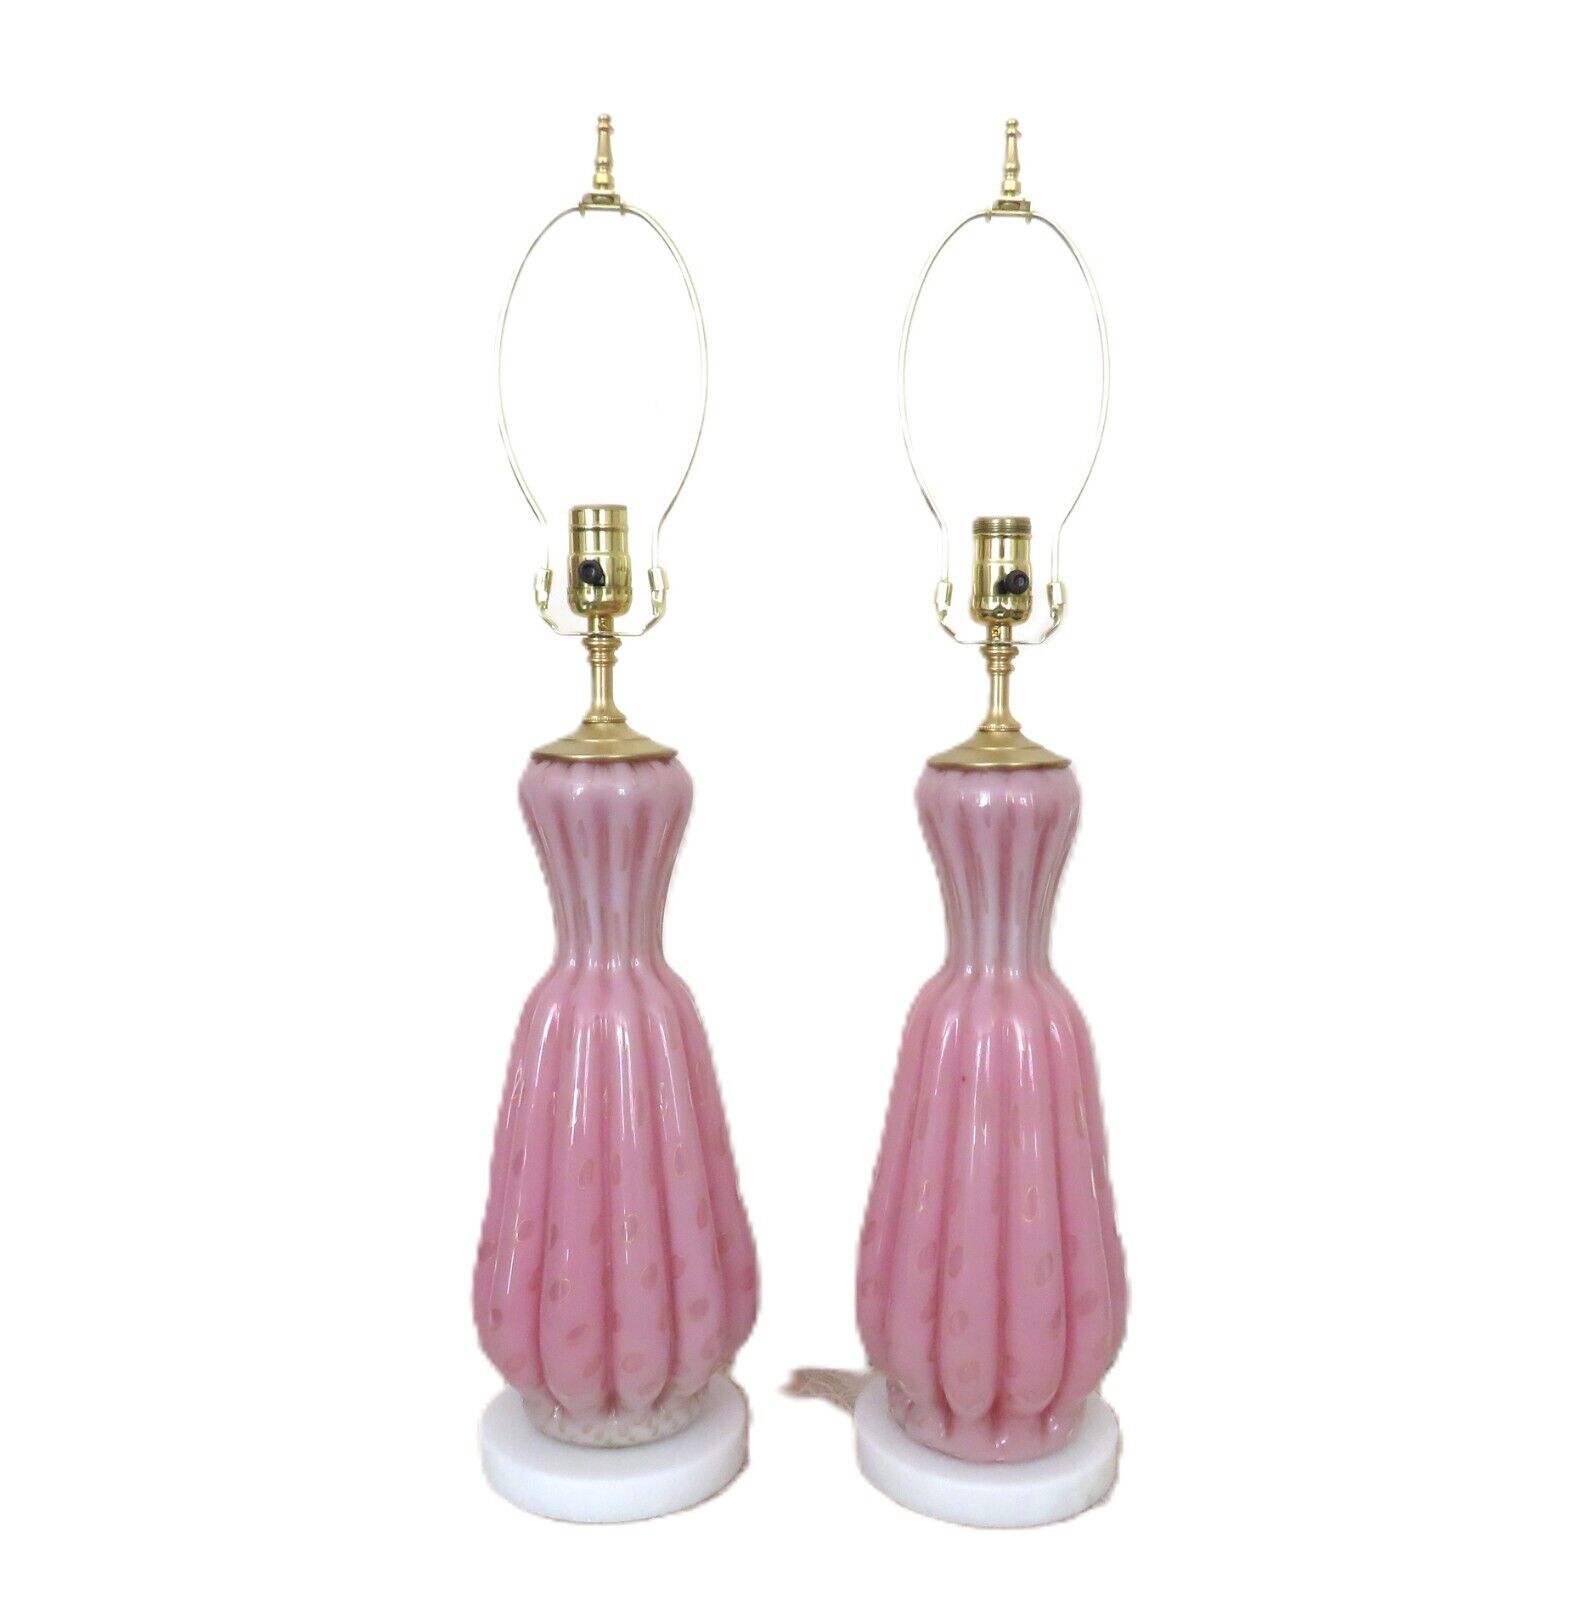 Pair of Barovier & Toso Murano Pink Glass Table Lamps Italian Mid Century Modern